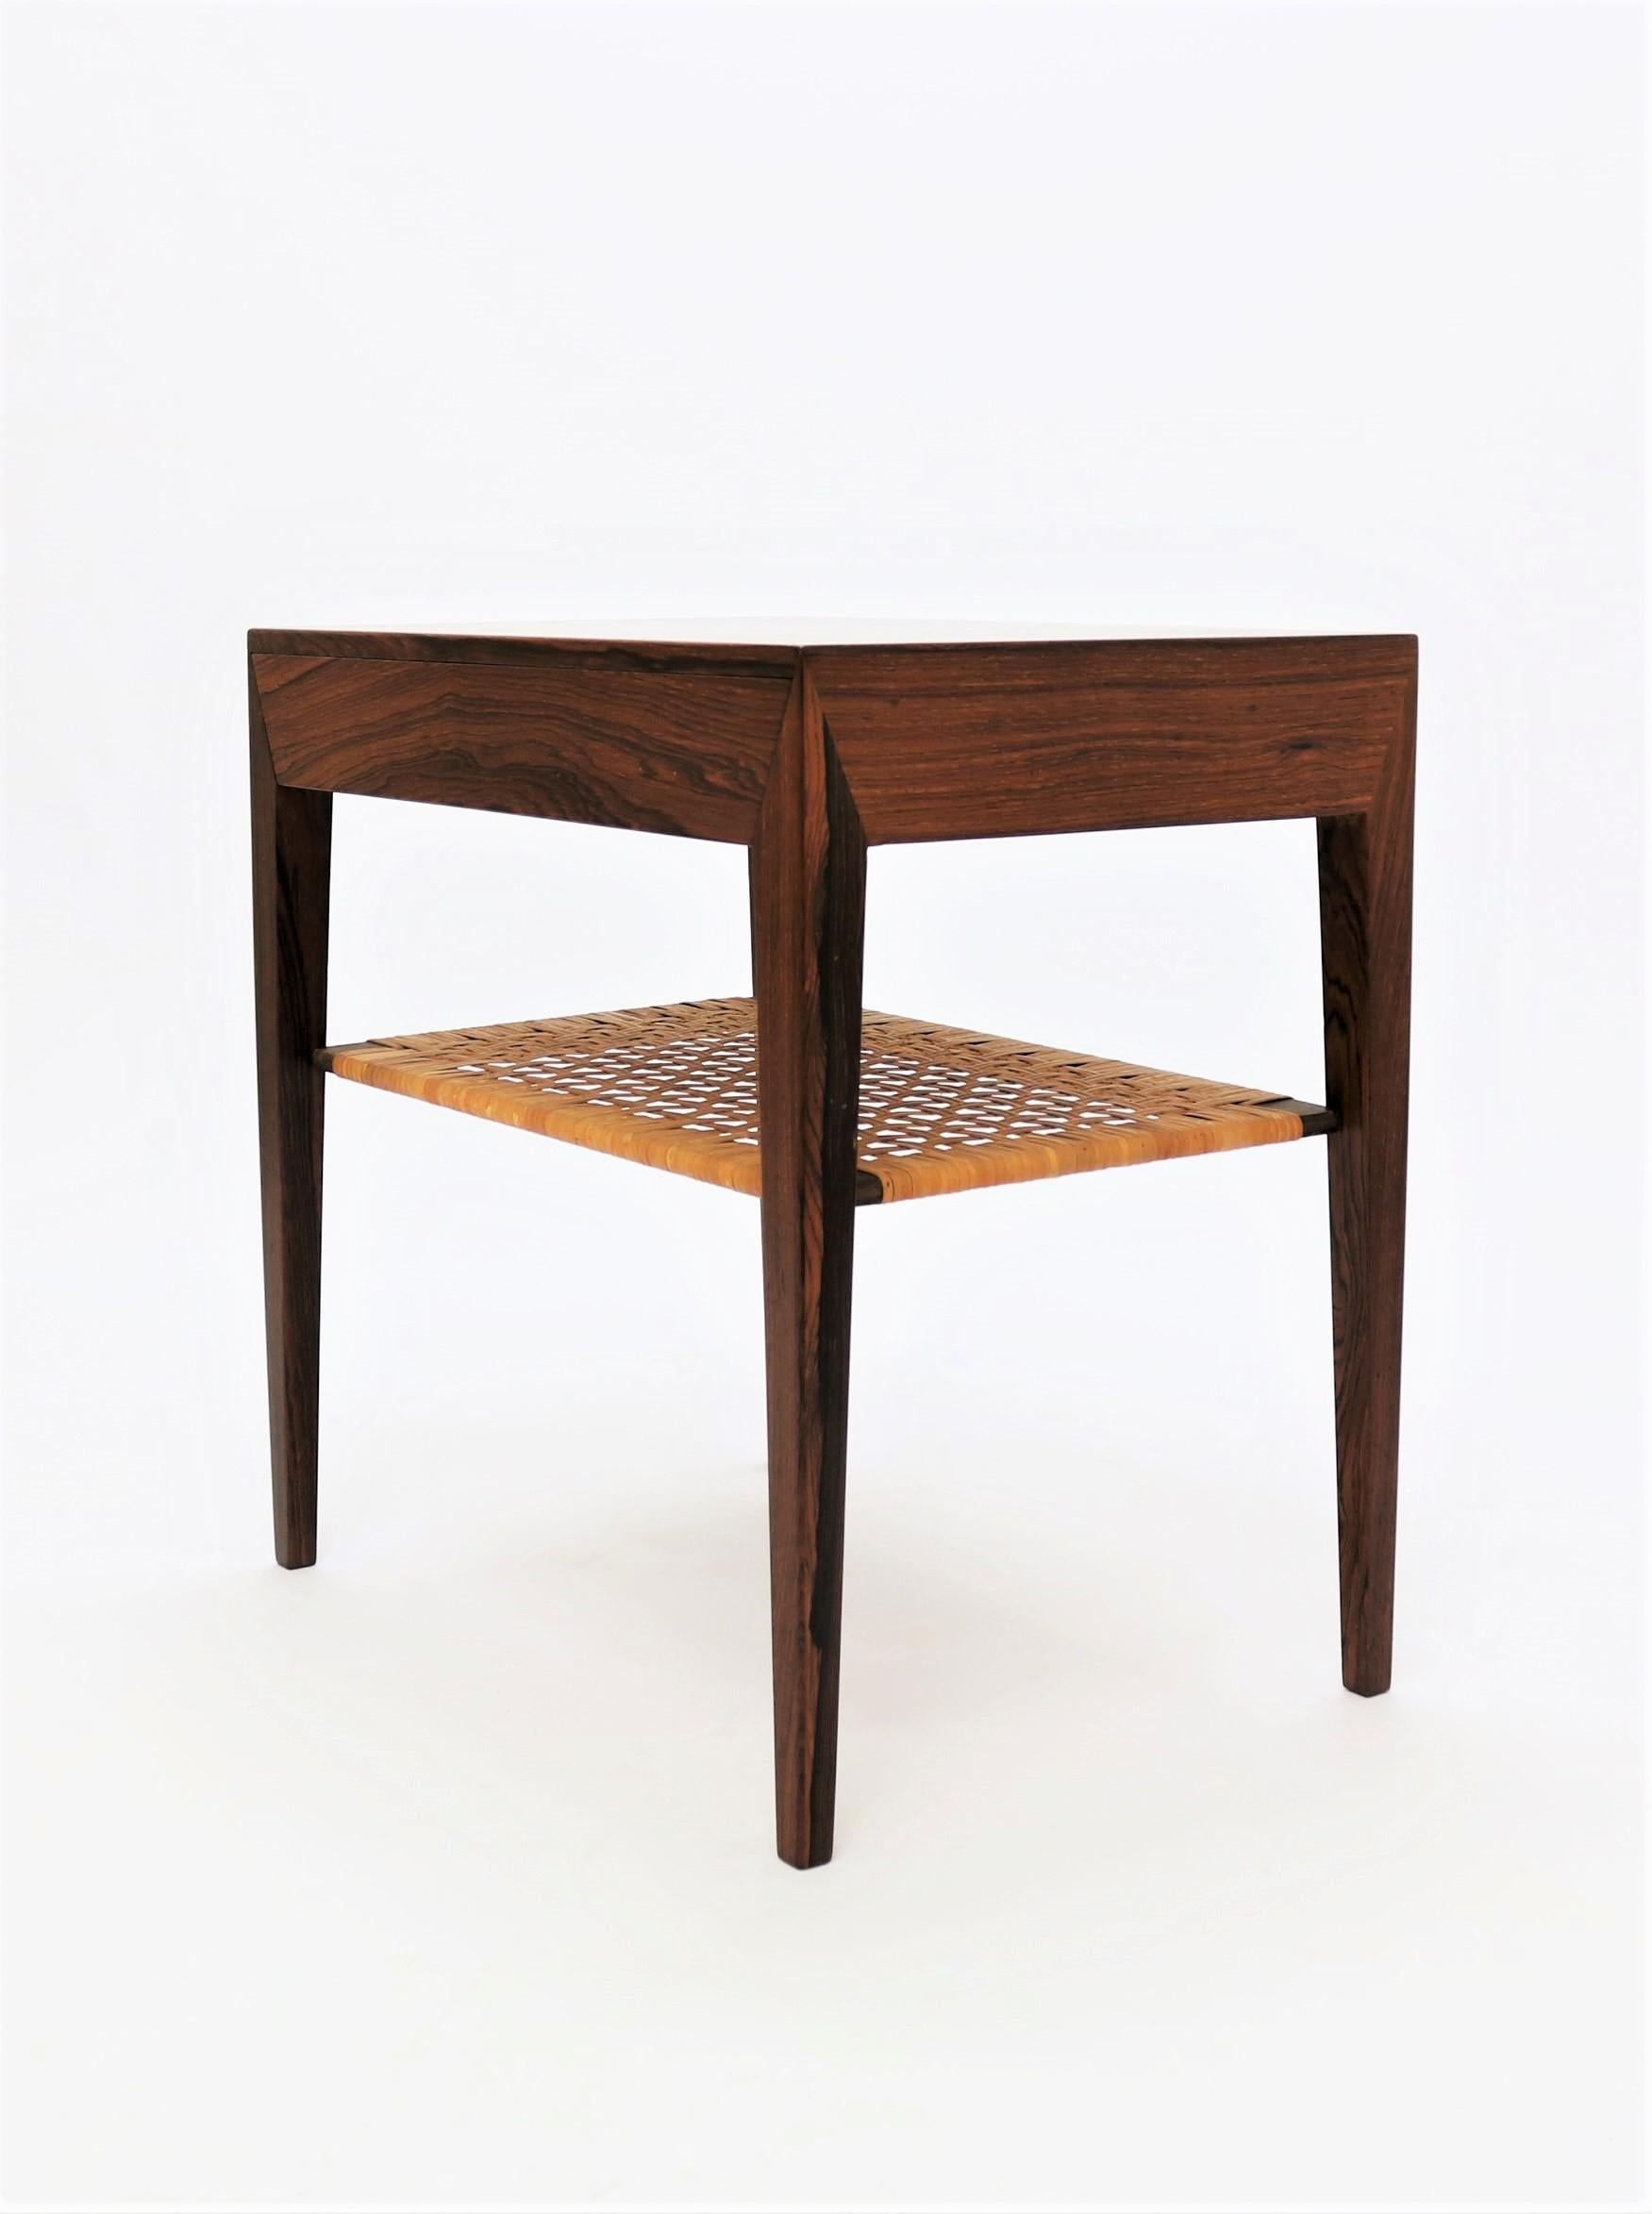 This stunning design was made in the 1950s by Danish Designer Severin Hansen Jr. for Haslev Møbelfabrik (Haslev Furniture), Denmark. The table features an integrated drawer and an elegant shelf in beautifully patinated woven cane. Iconic piece of